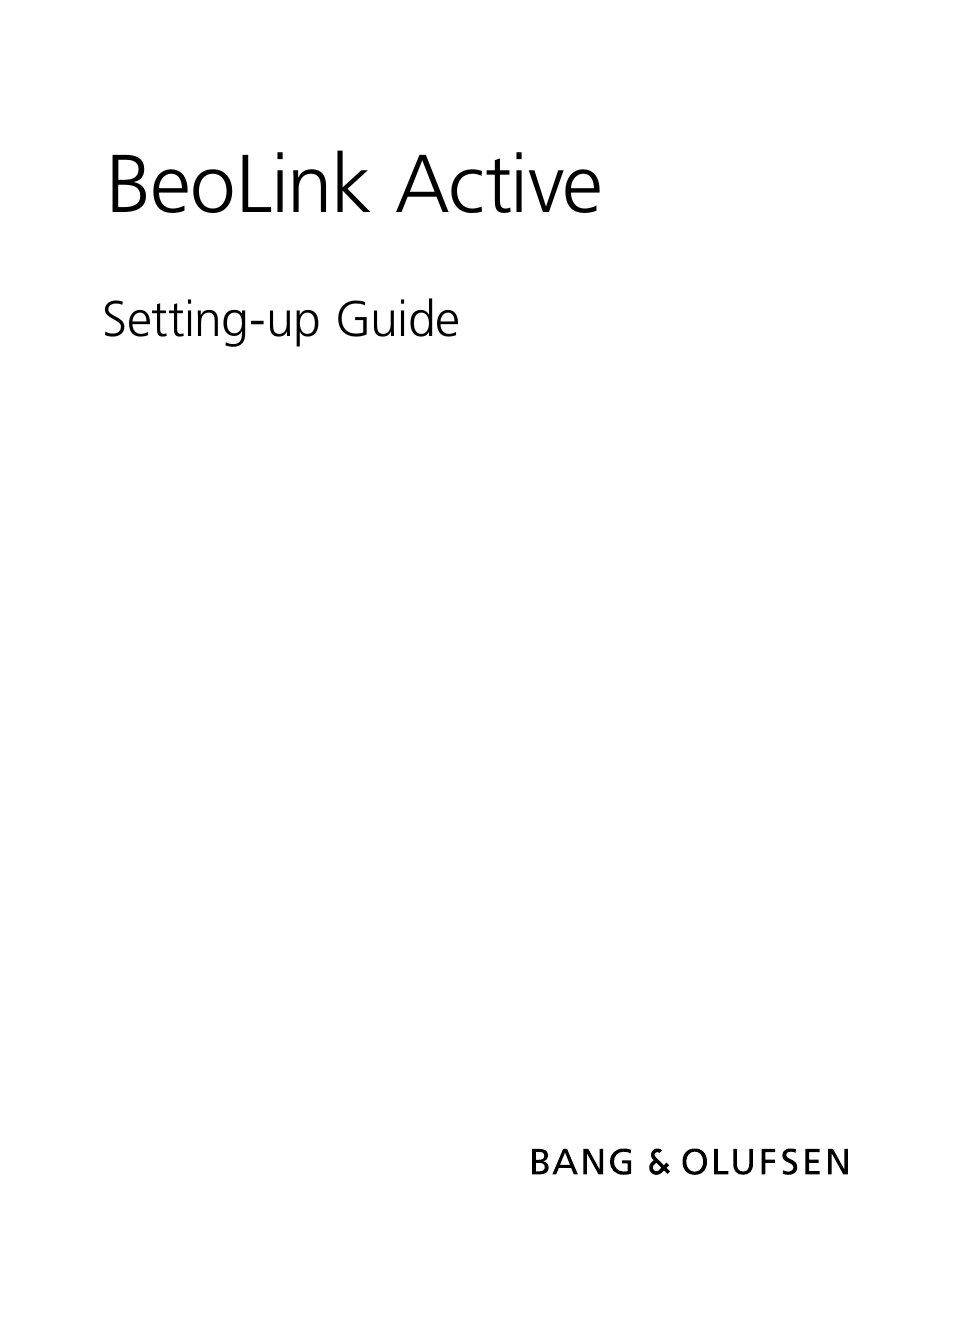 BeoLink Active - Setting-up Guide